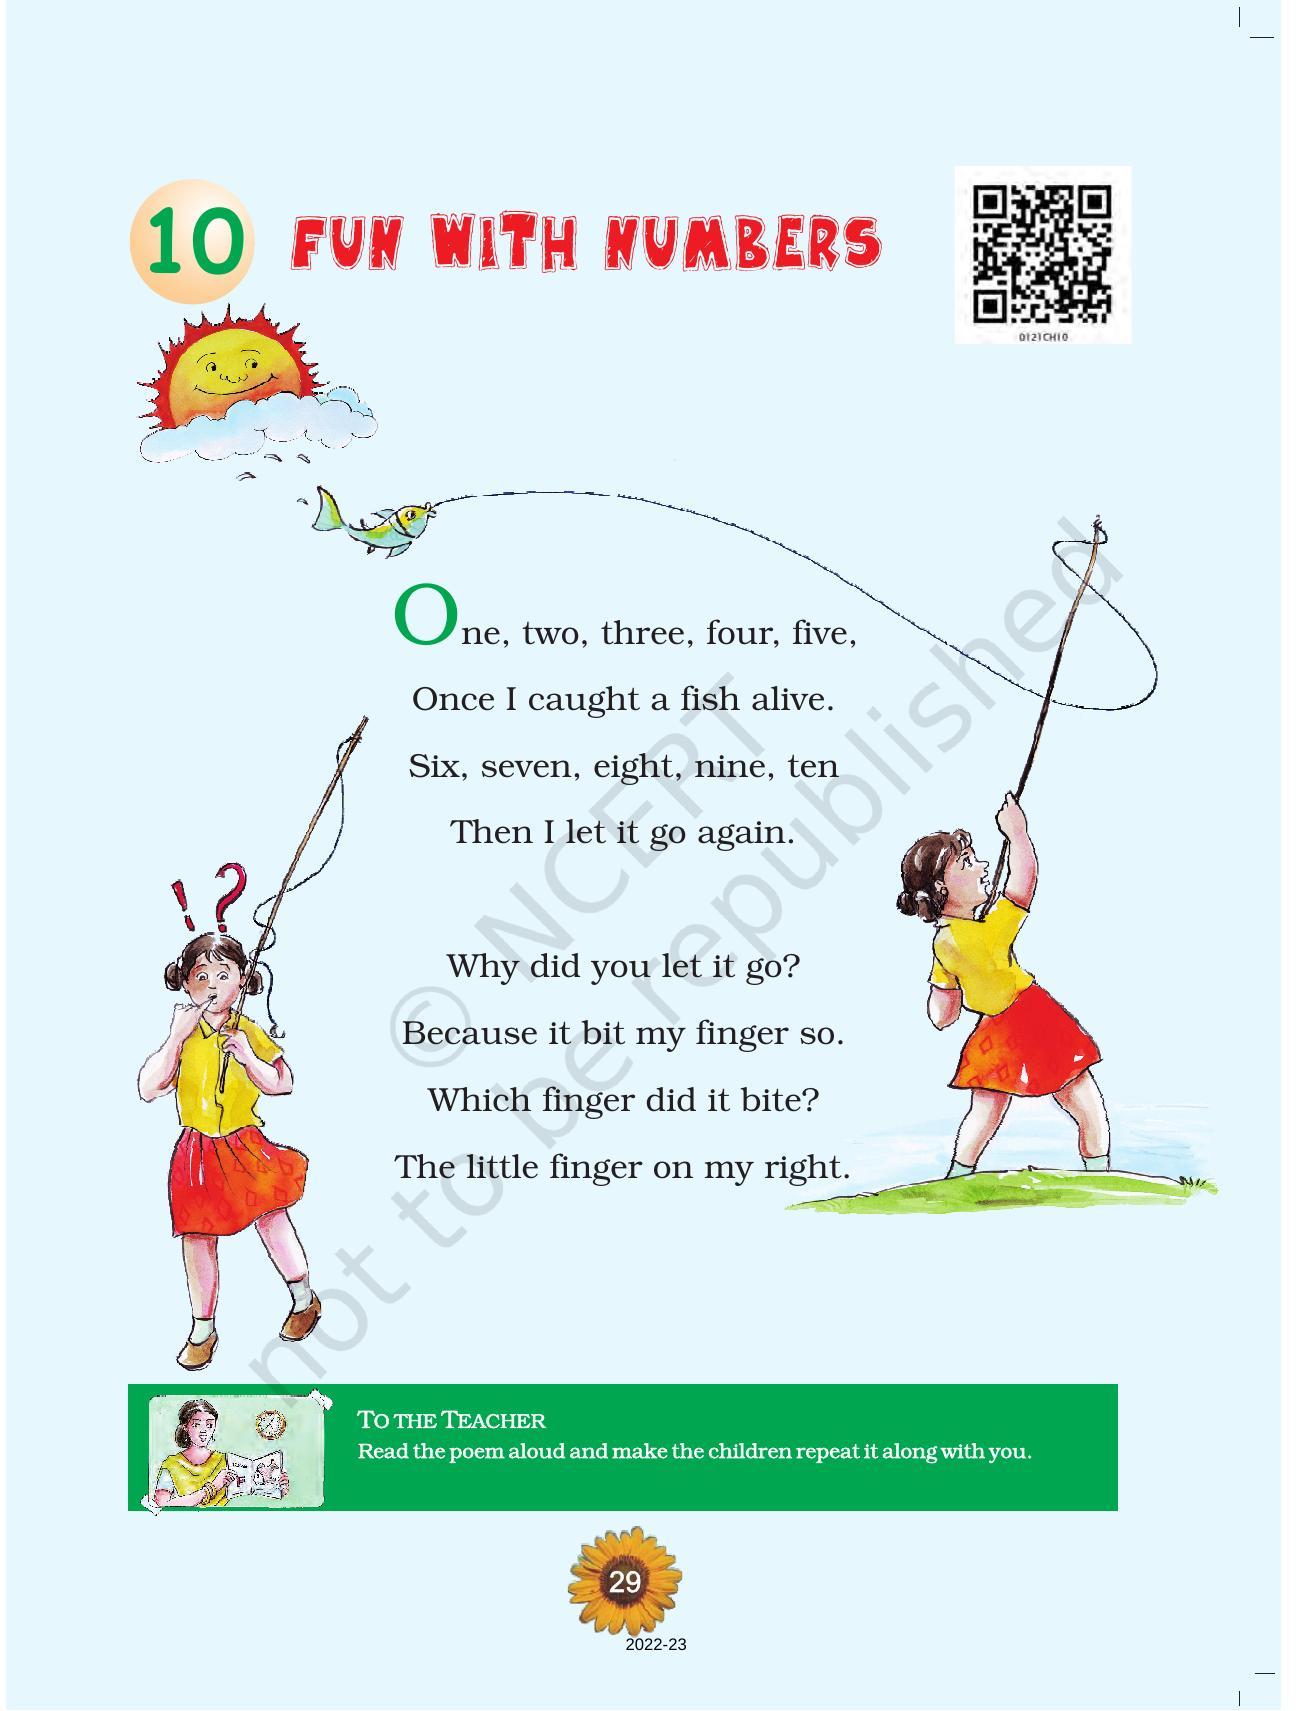 NCERT Book for Class 1 English (Raindrop):Unit 10-Fun with Numbers - Page 1